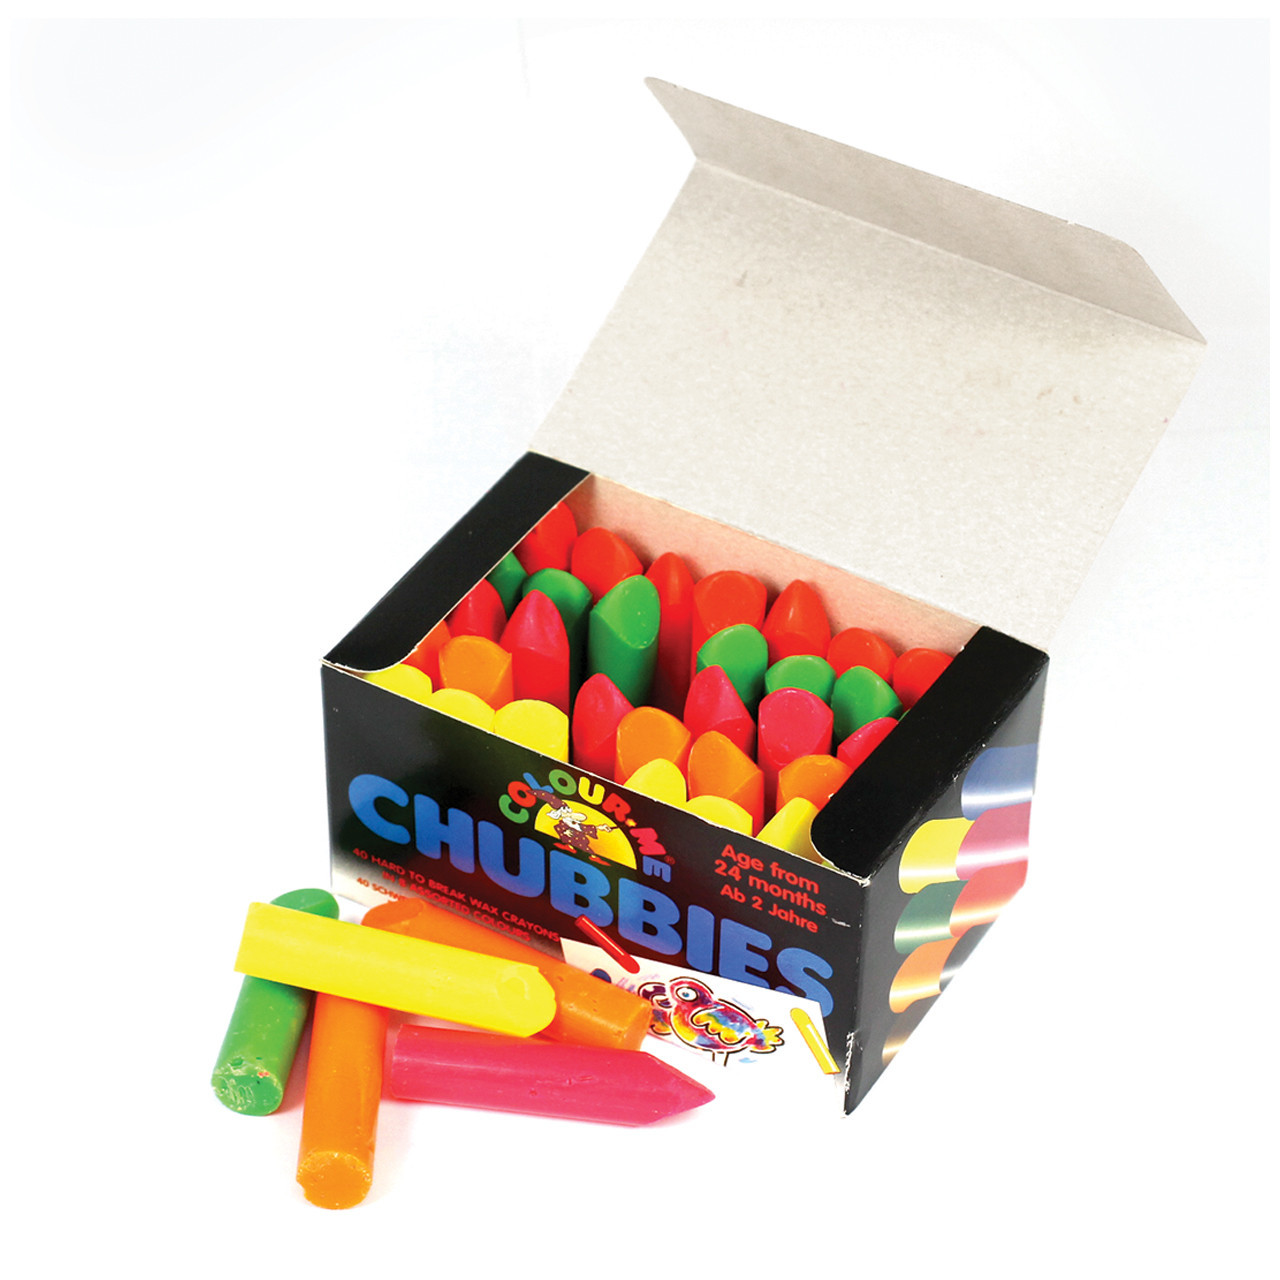 40-Pack of Vibrant Neon Wax Crayons